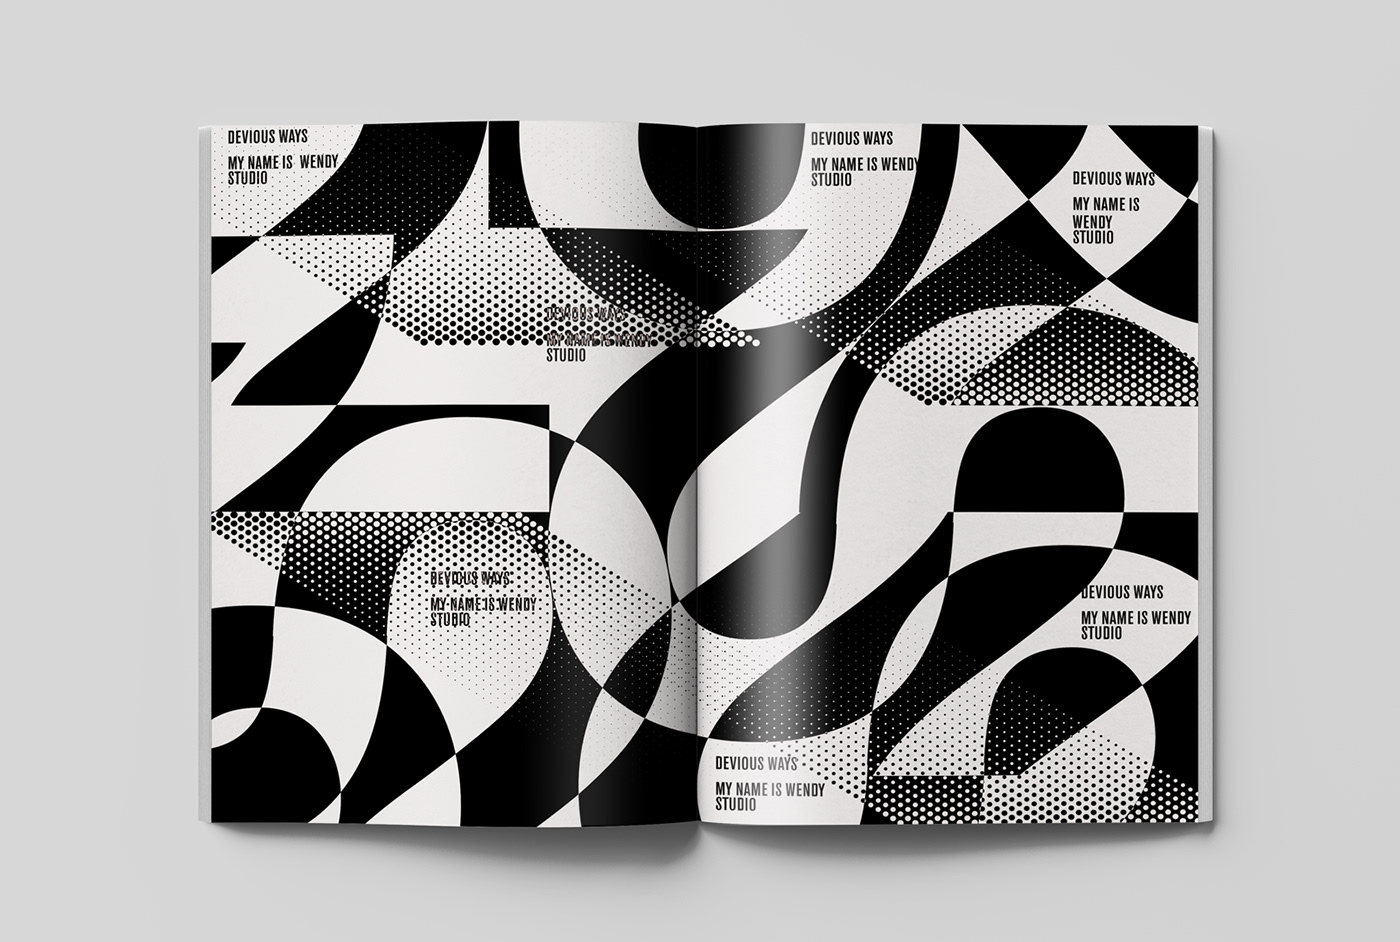 Typographic composition with black and white patterns and shapes